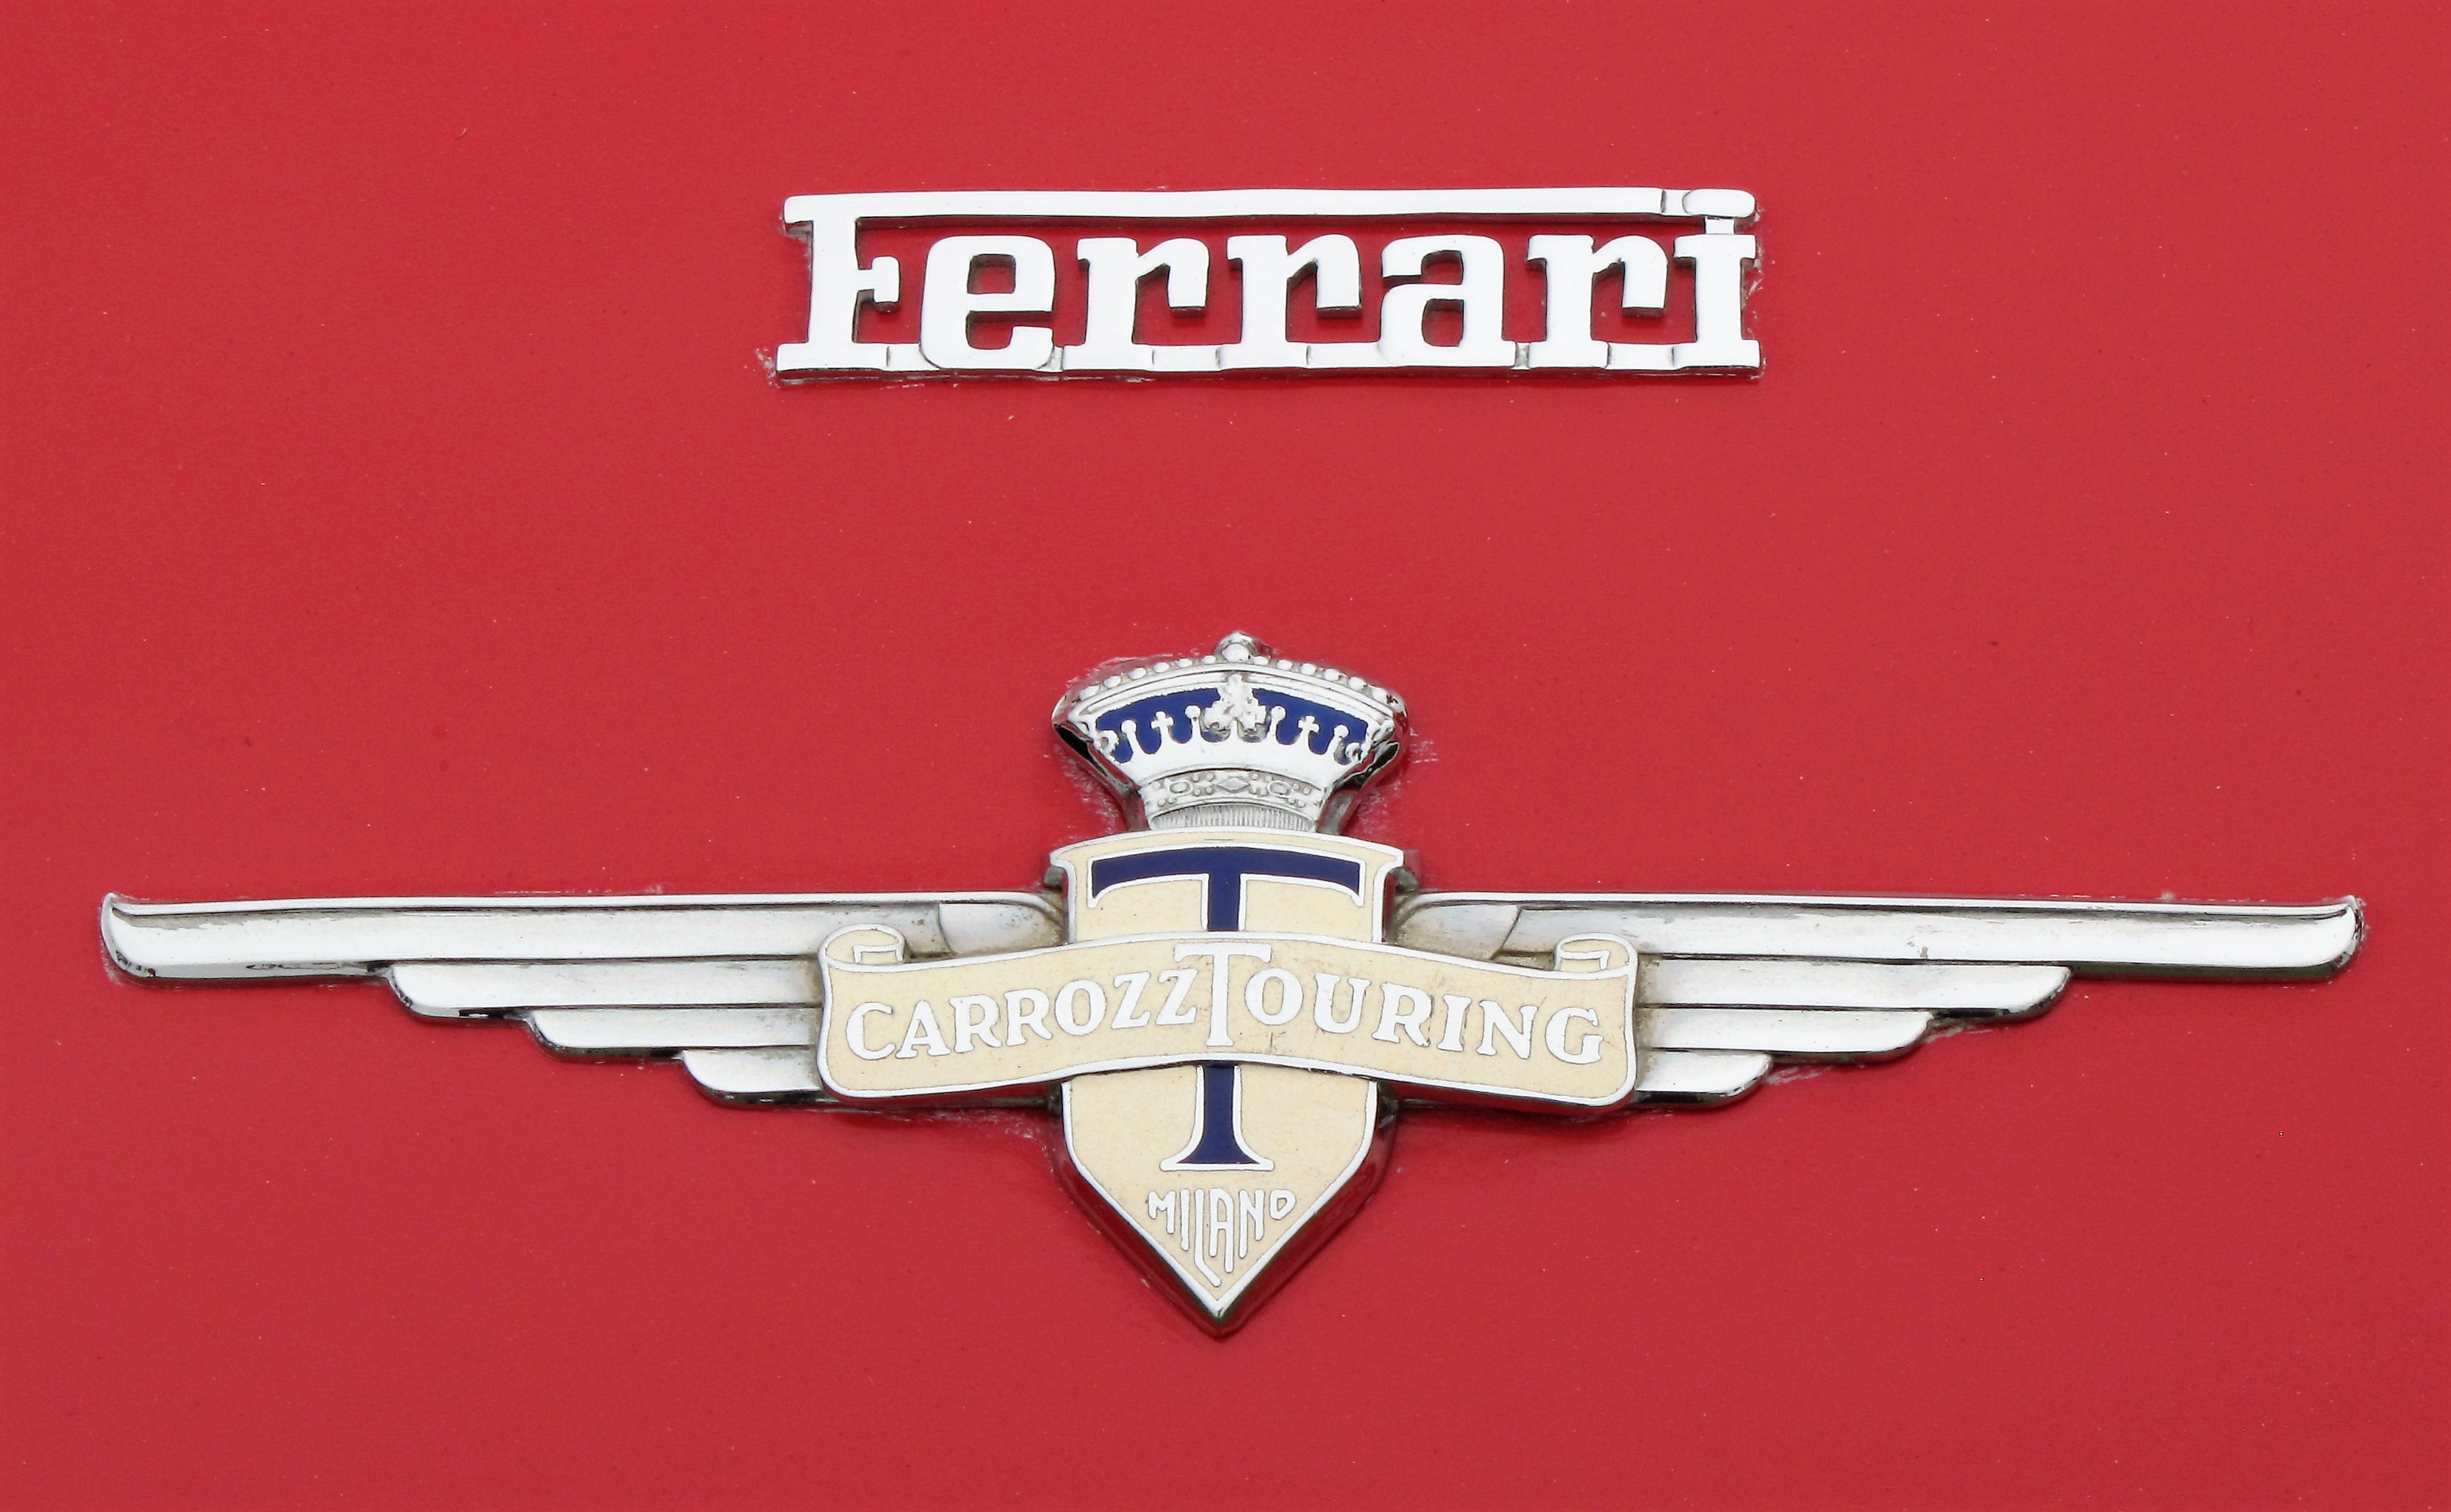 Ferrari, Question of the Day: What is your favorite Ferrari?, ClassicCars.com Journal